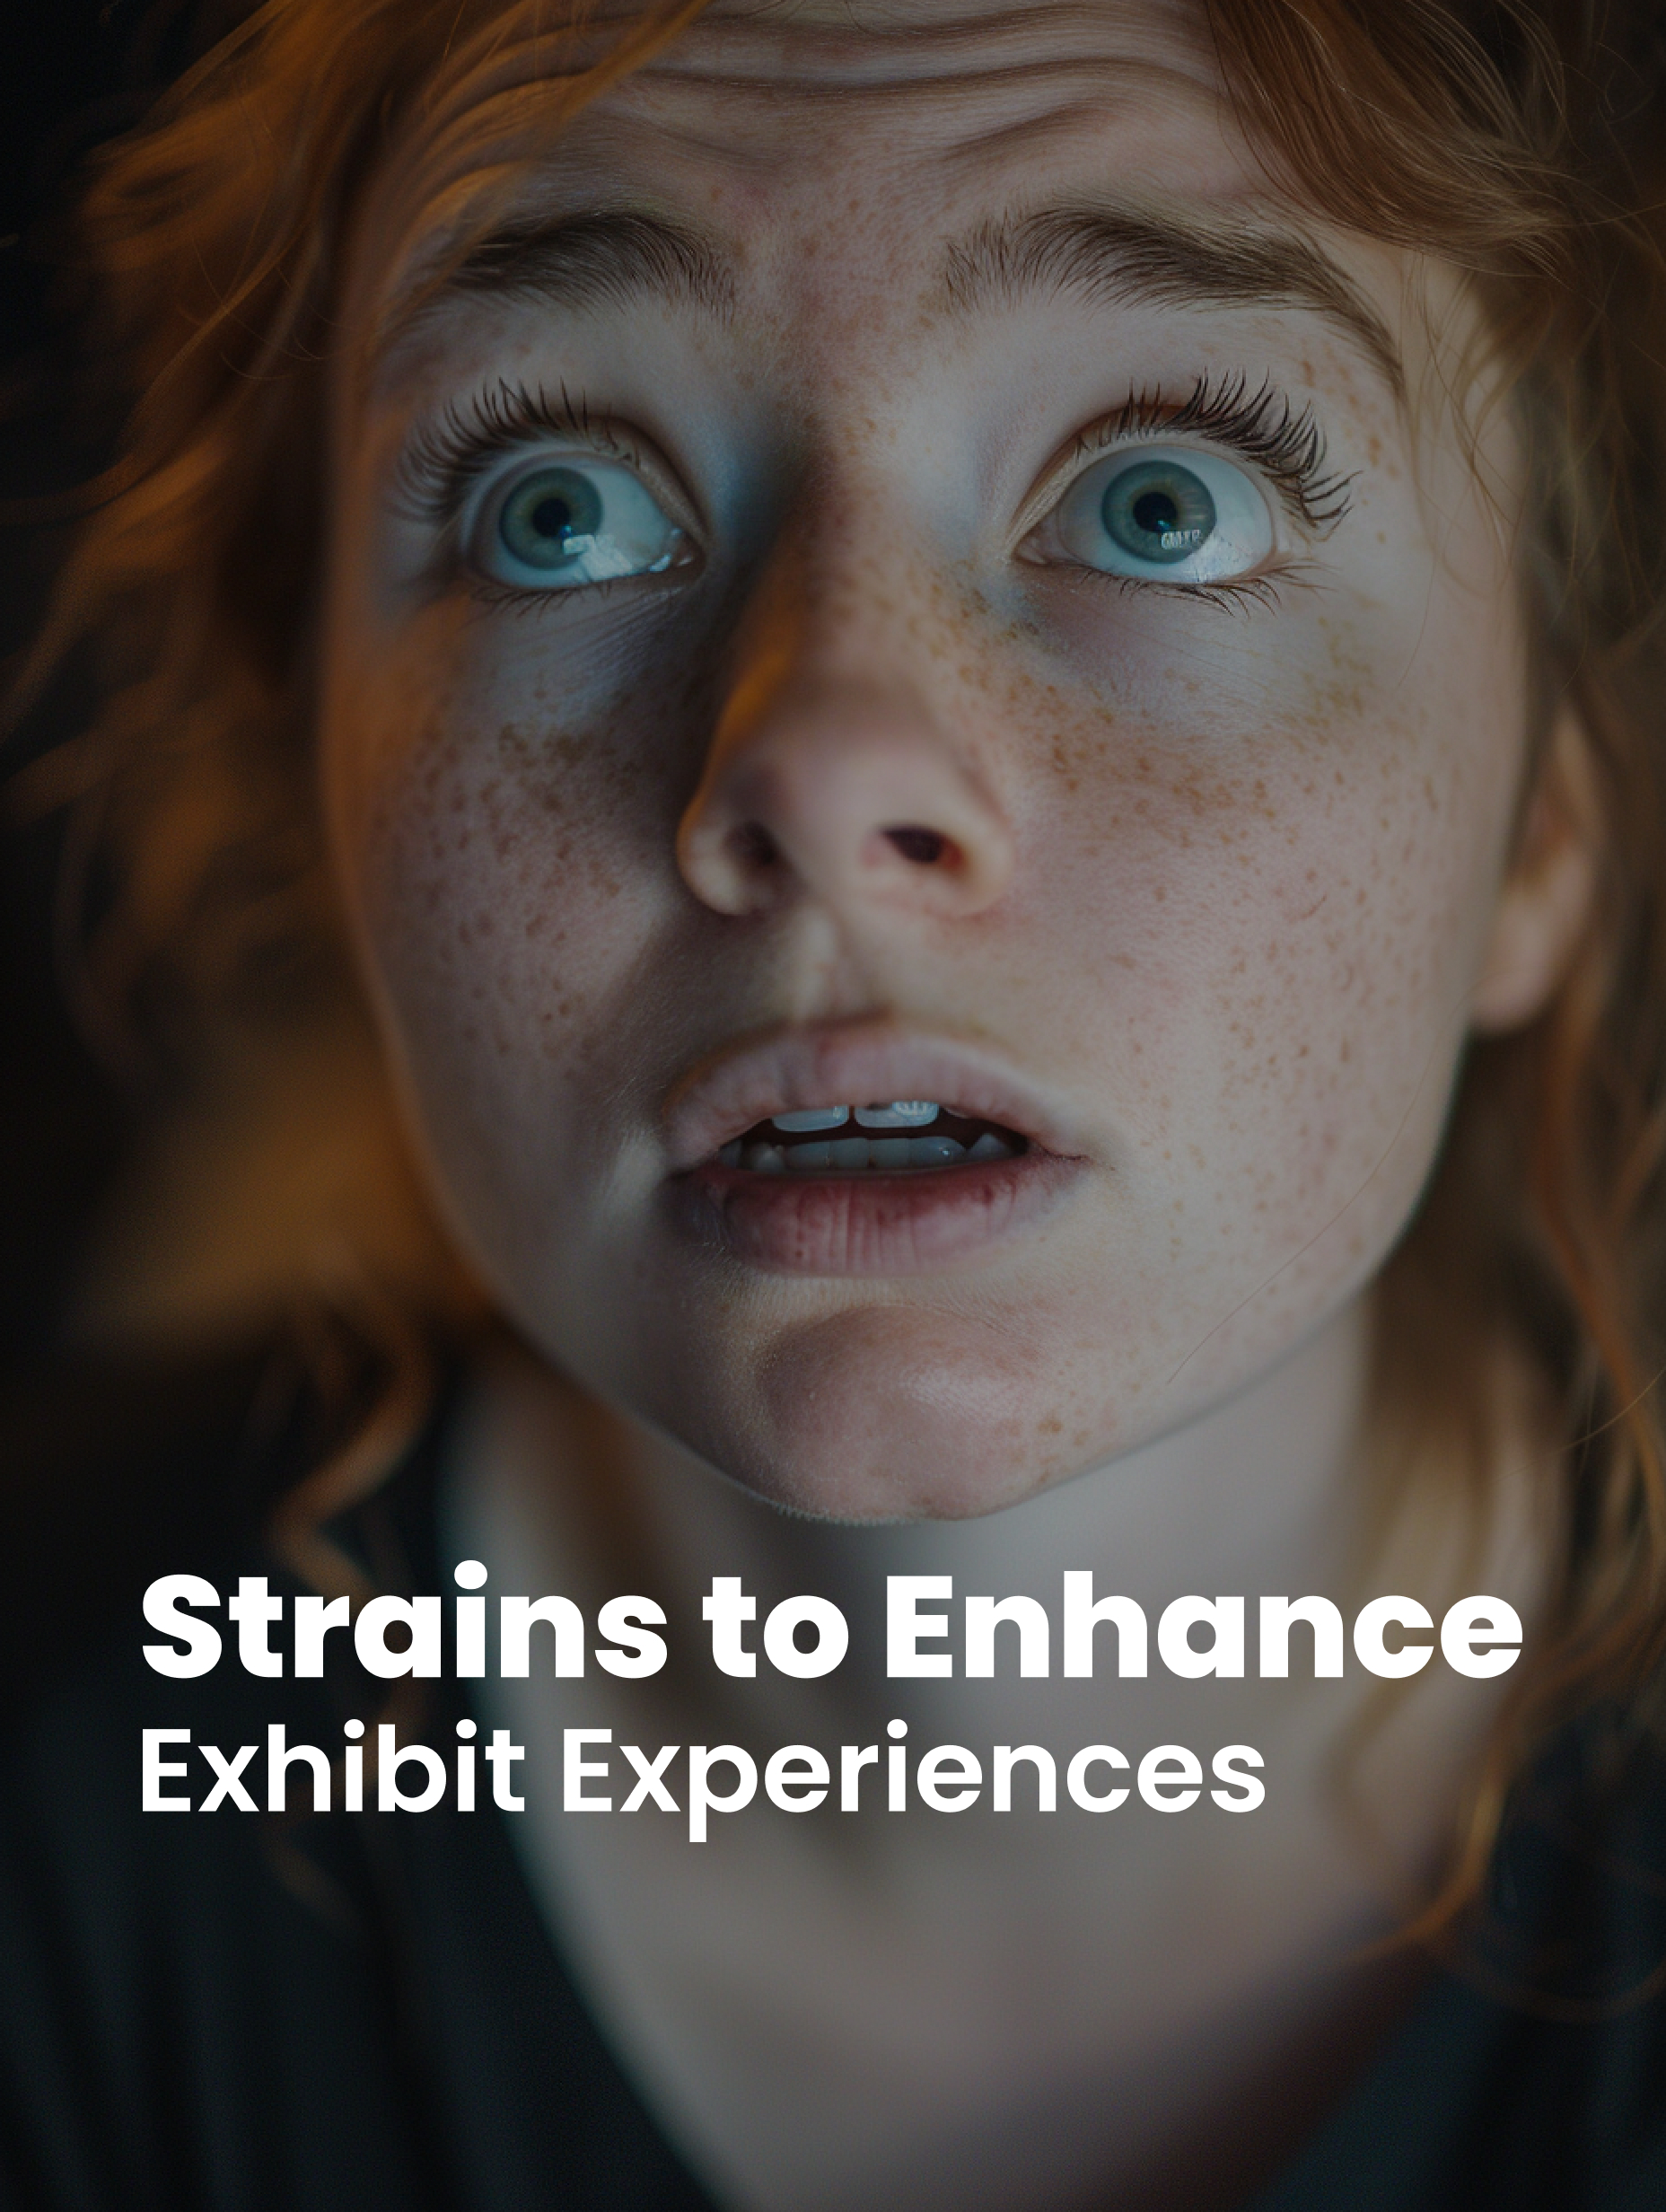 Strains to Enhance Experiences